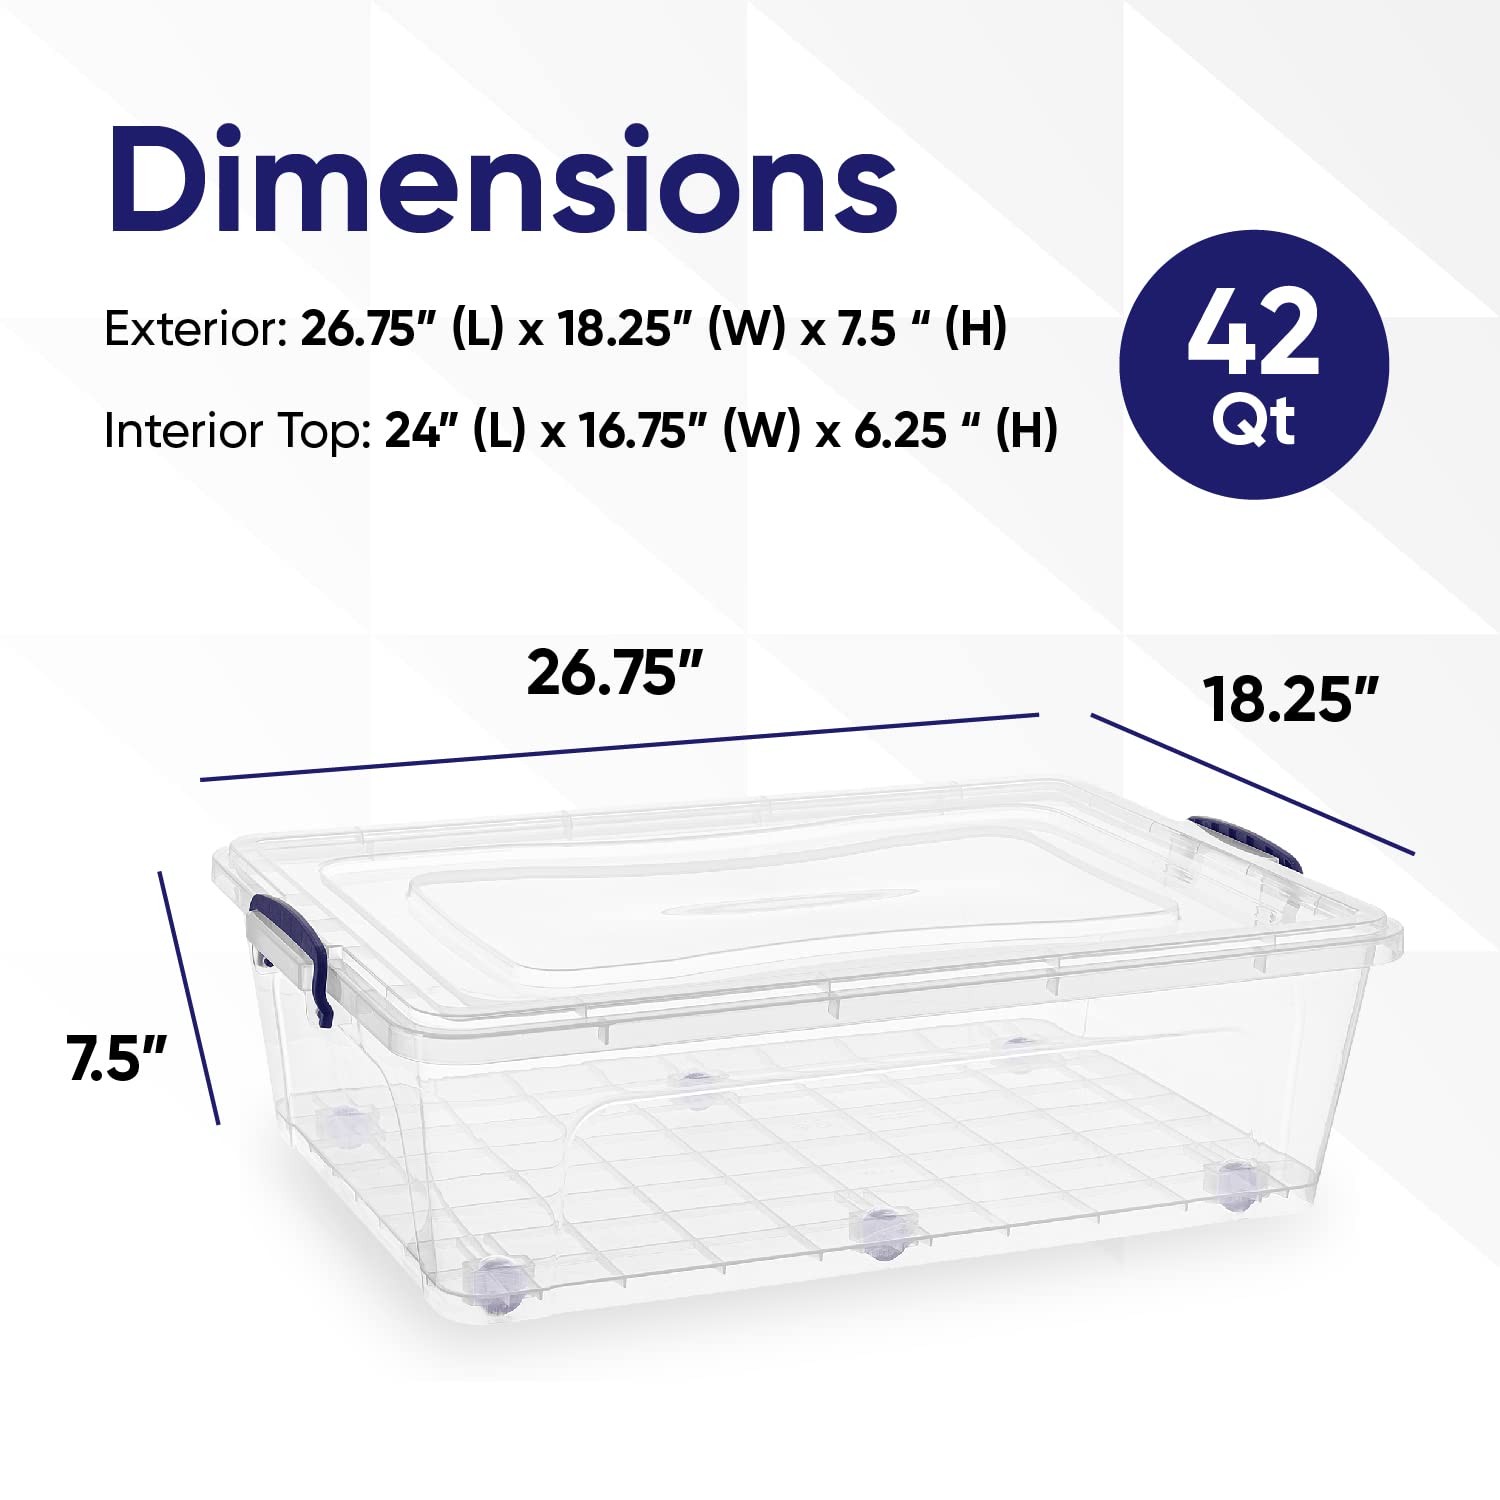 Superio Under Bed Storage Containers with Wheels (2 Pack), Flat Clear Storage Bin Stackable Large Storage Latch Box with Lids Store Cloths, Bedding, Linen, For Under The Bed, Garage, Home